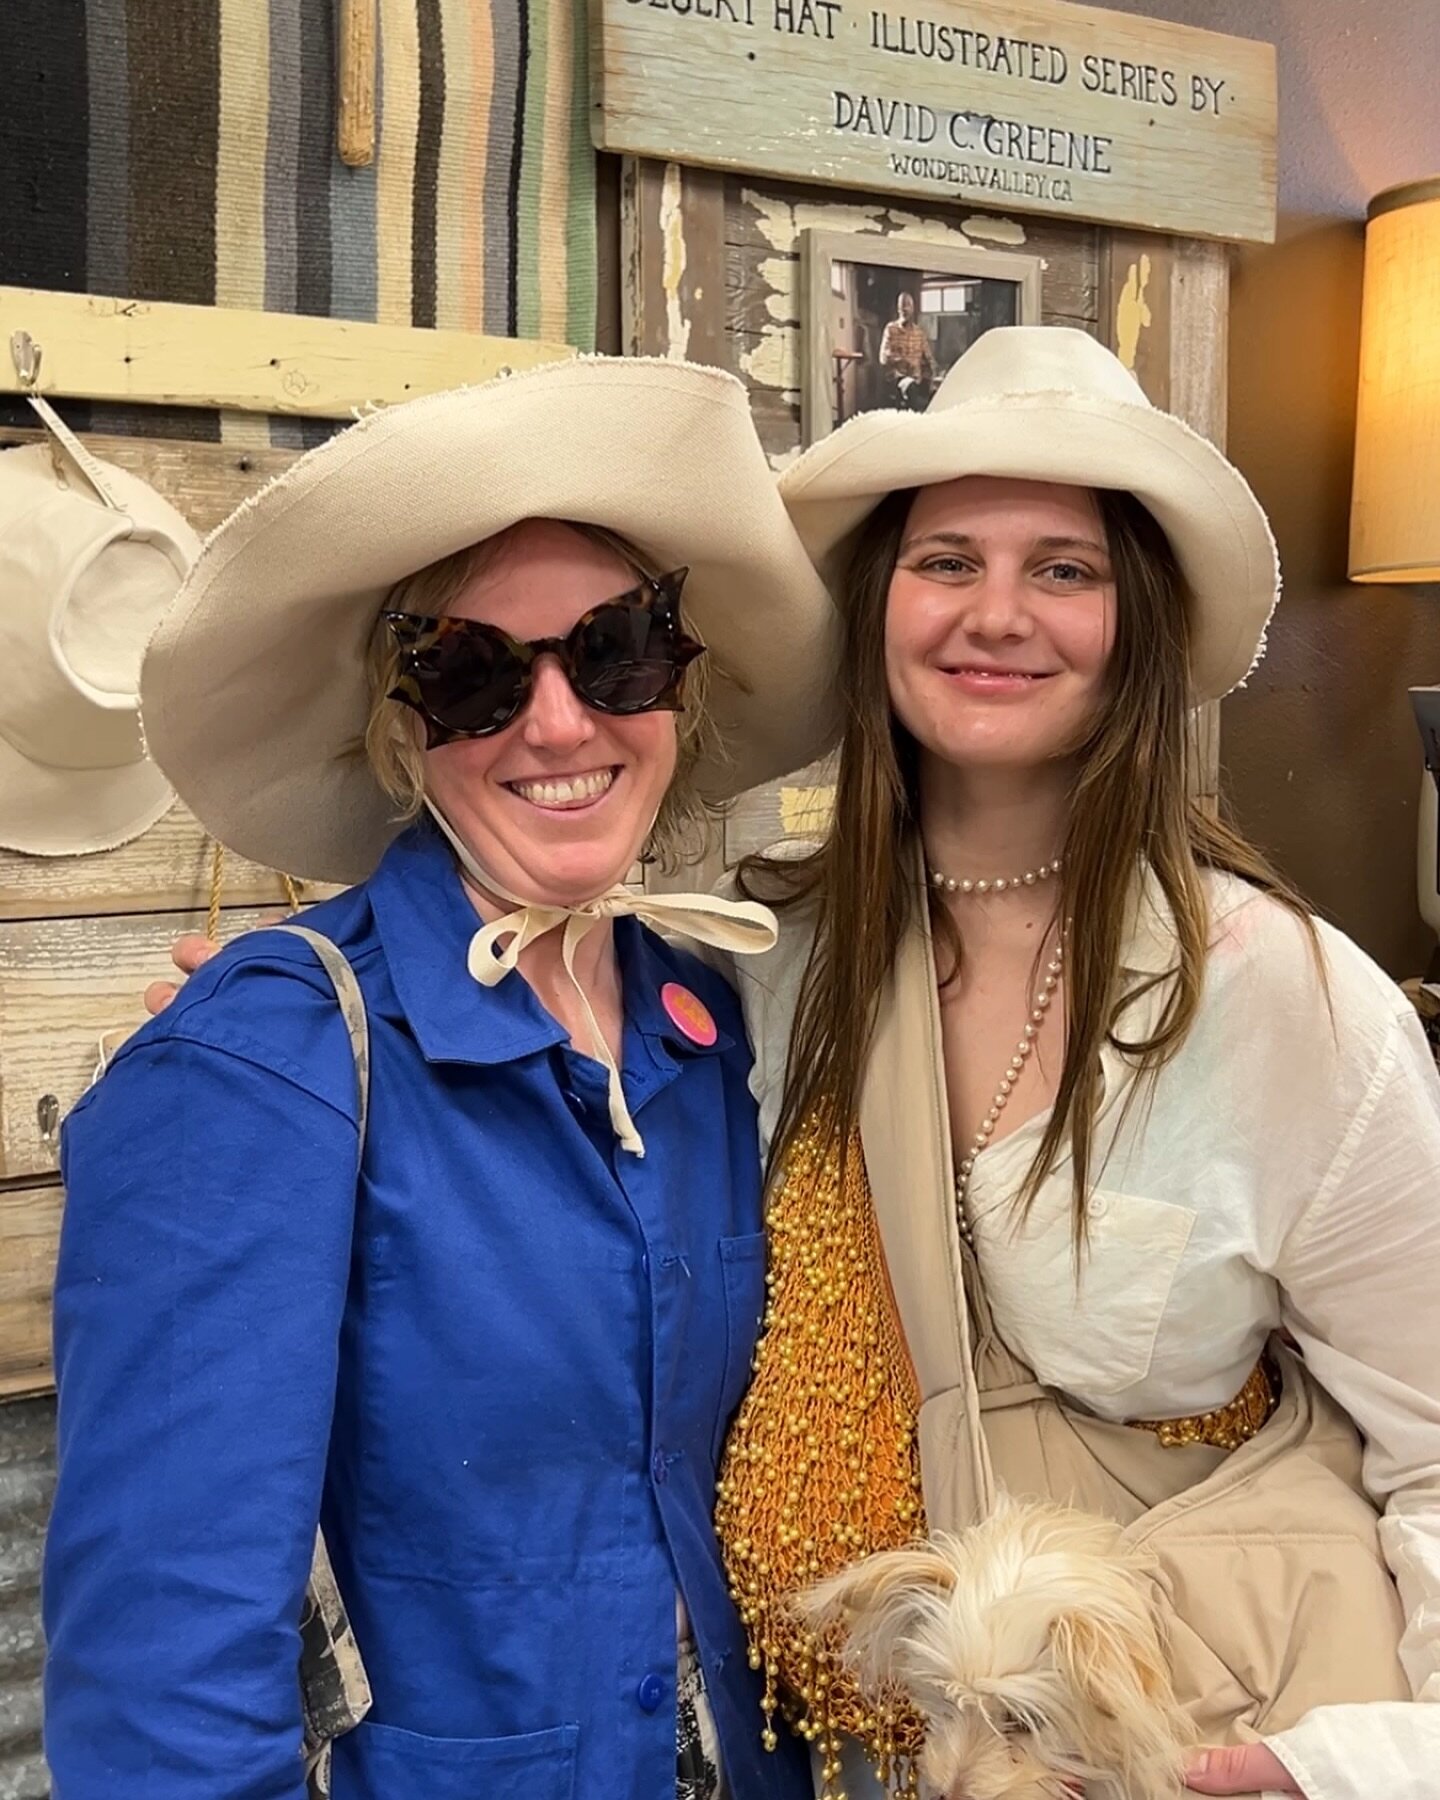 When two lovely young women spend the weekend in the HiDez and choose to adopt the &ldquo;desert look&rdquo;. Meet with @louisaknoer and @bridgethonan with their new Desert Hats. Thank you Louisa and Bridget for your visit. You both look amazing, and